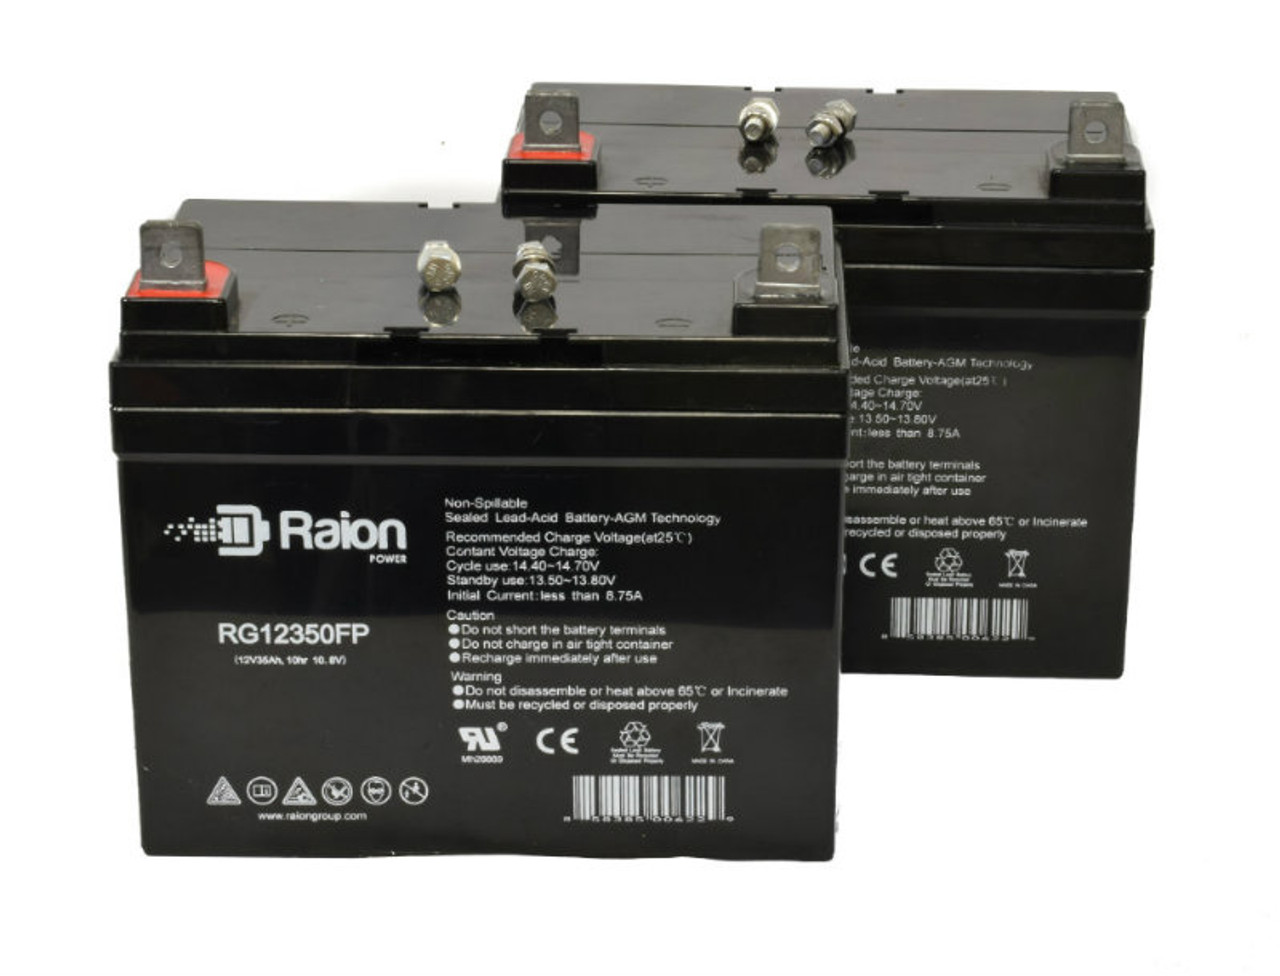 Raion Power Replacement 12V 35Ah Lawn Mower Battery for Black & Decker 242675-00 - 2 Pack